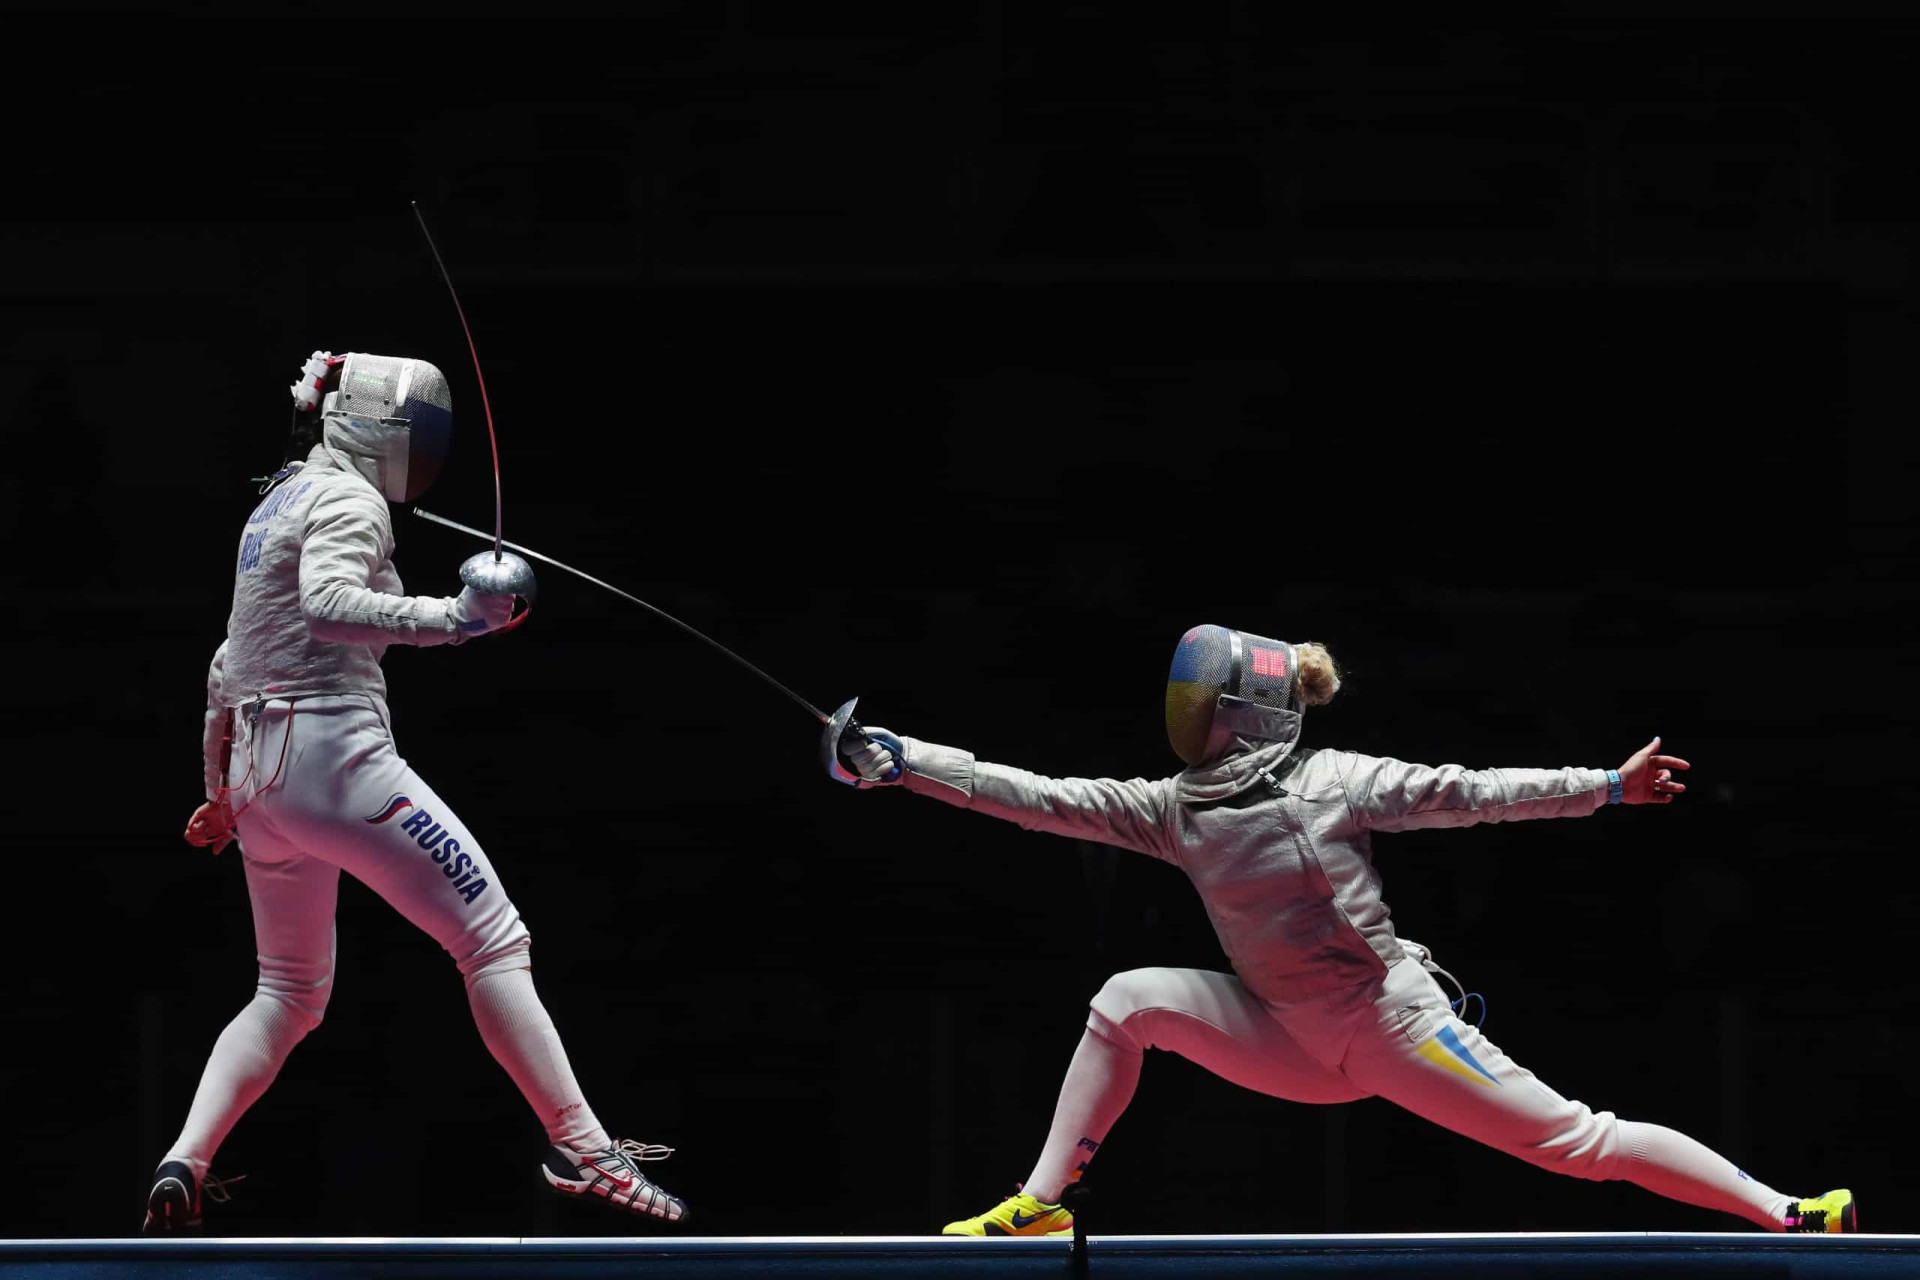 <div>Based on the traditional skills of swordsmanship, fencing became an increasingly organized competitive sport late in the 19th century. The sport's governing body, the International Fencing Federation (FIE), was founded in 1913, with the French, Italians, and Hungarians dominating most fencing competitions for the first half of the century.</div><p><a href="https://www.msn.com/en-ph/community/channel/vid-7xx8mnucu55yw63we9va2gwr7uihbxwc68fxqp25x6tg4ftibpra?cvid=94631541bc0f4f89bfd59158d696ad7e">Follow us and access great exclusive content every day</a></p>